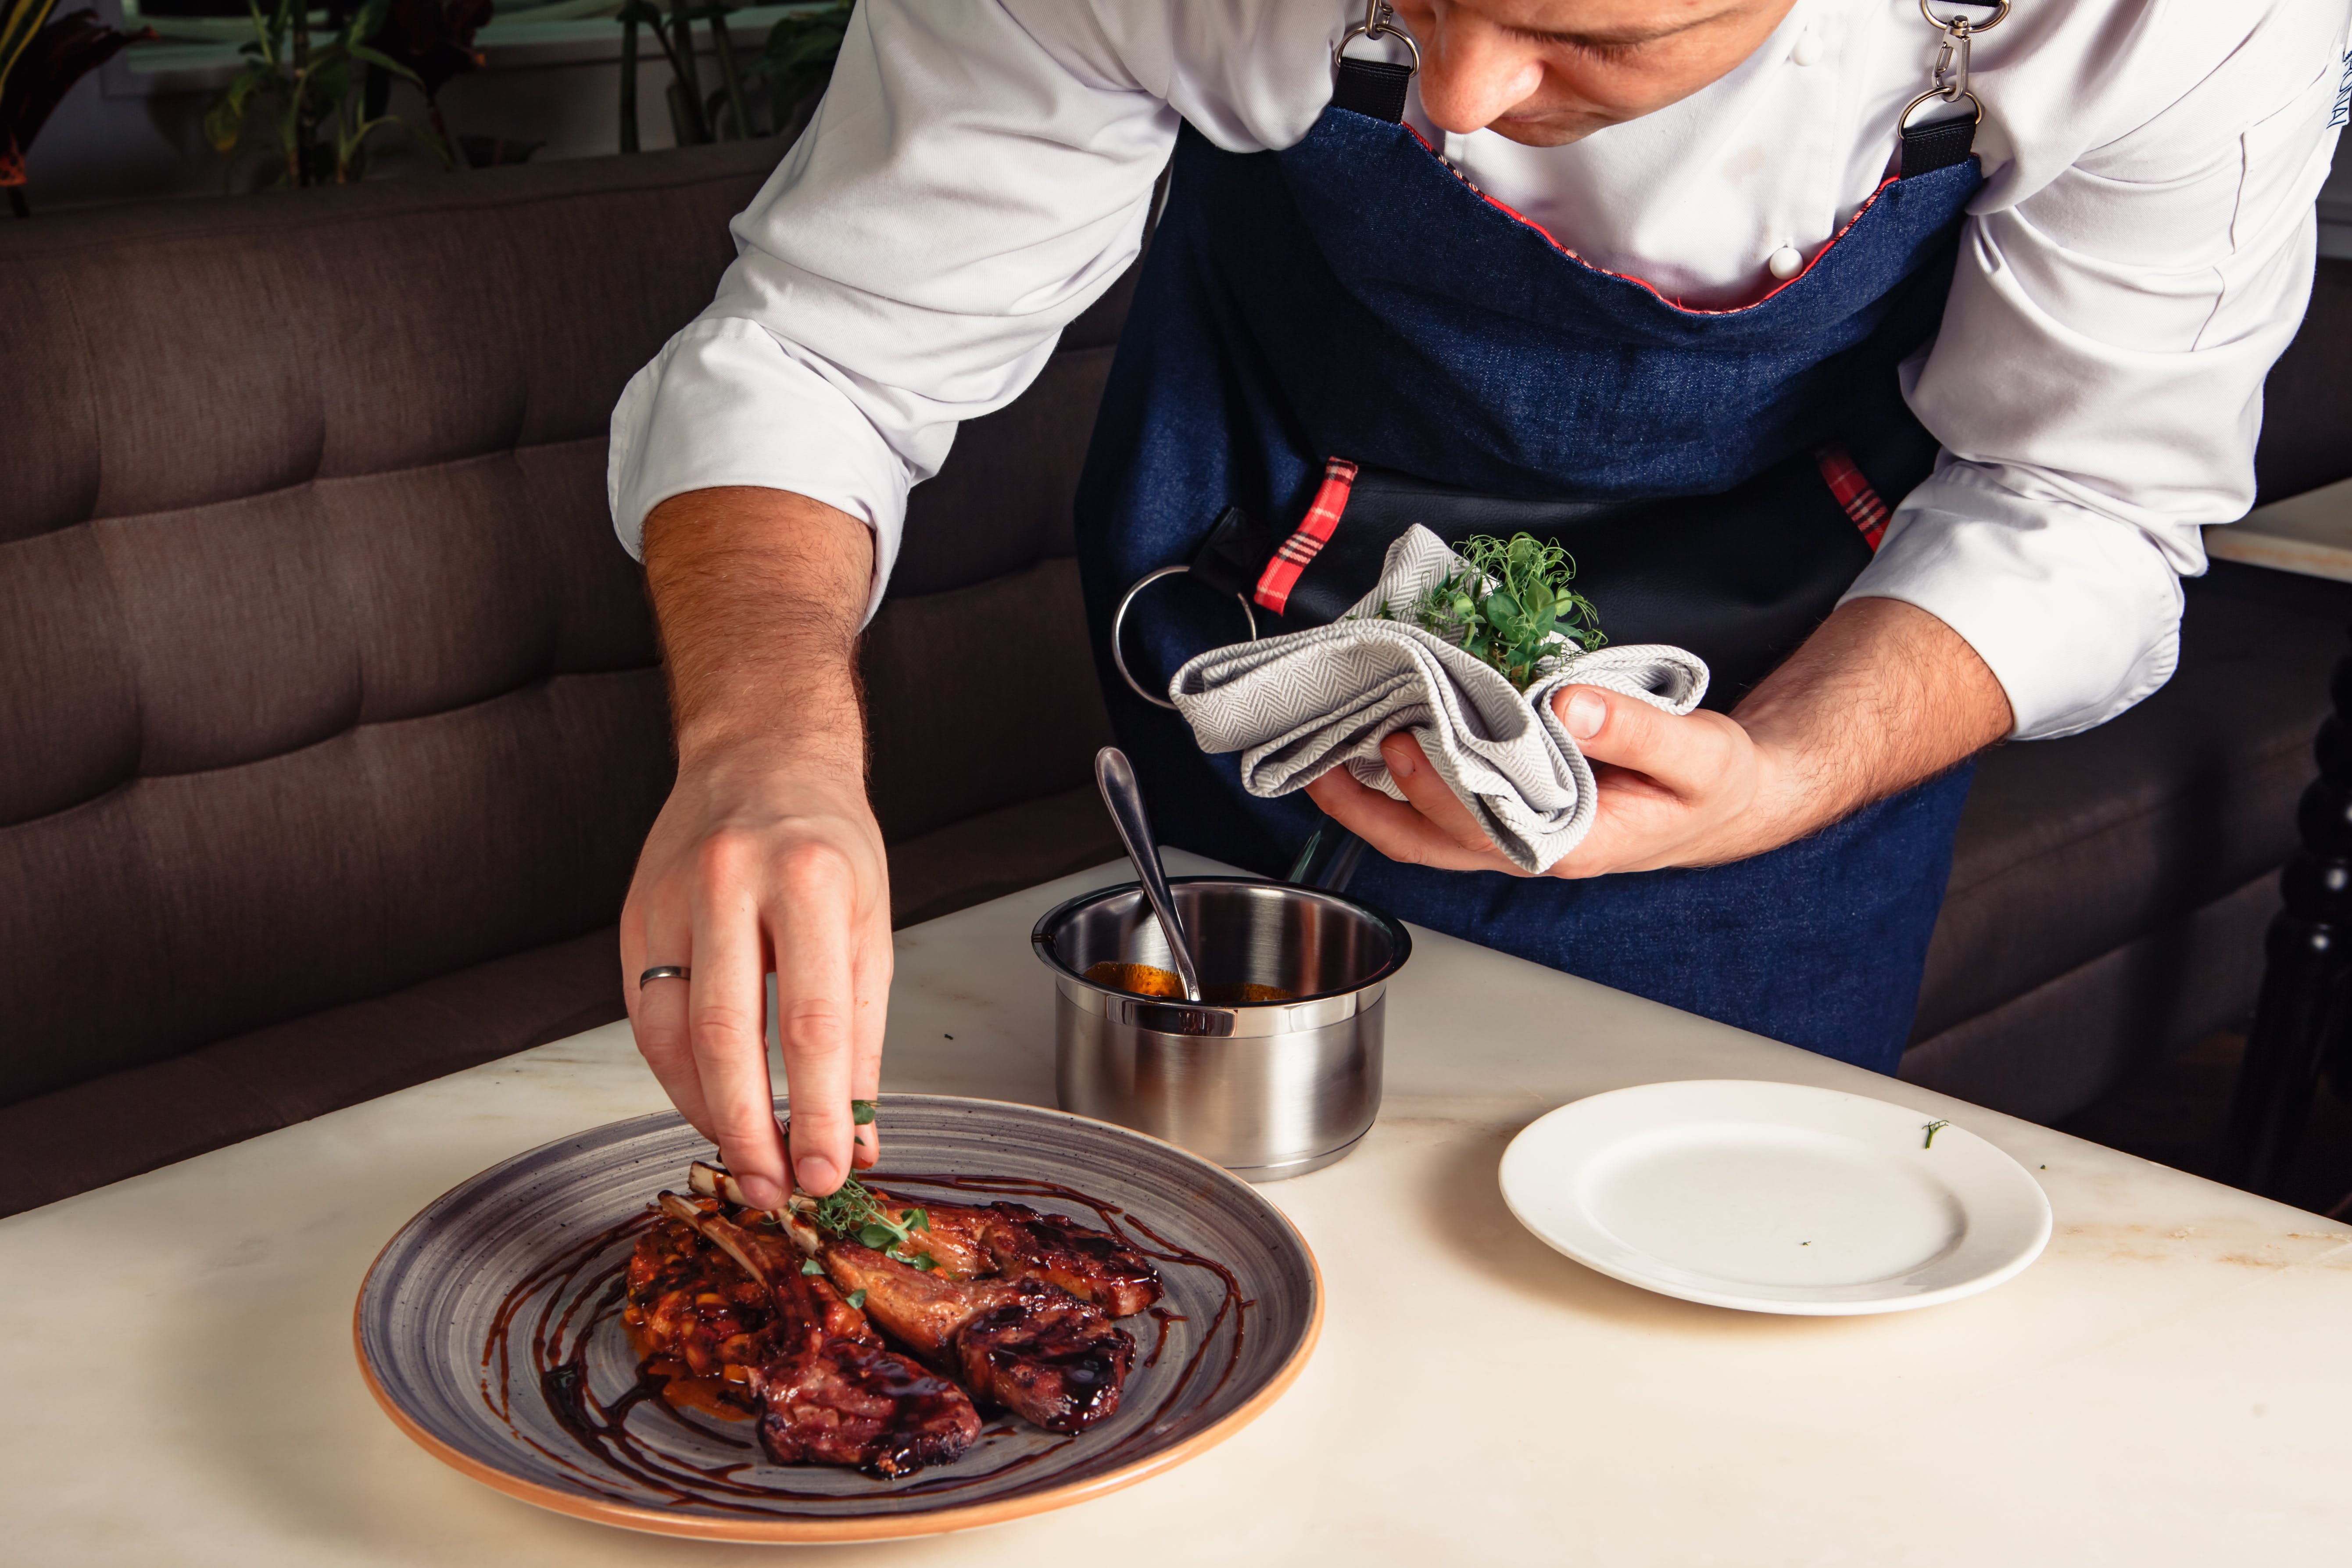 A cook arranges a plate nicely on a table